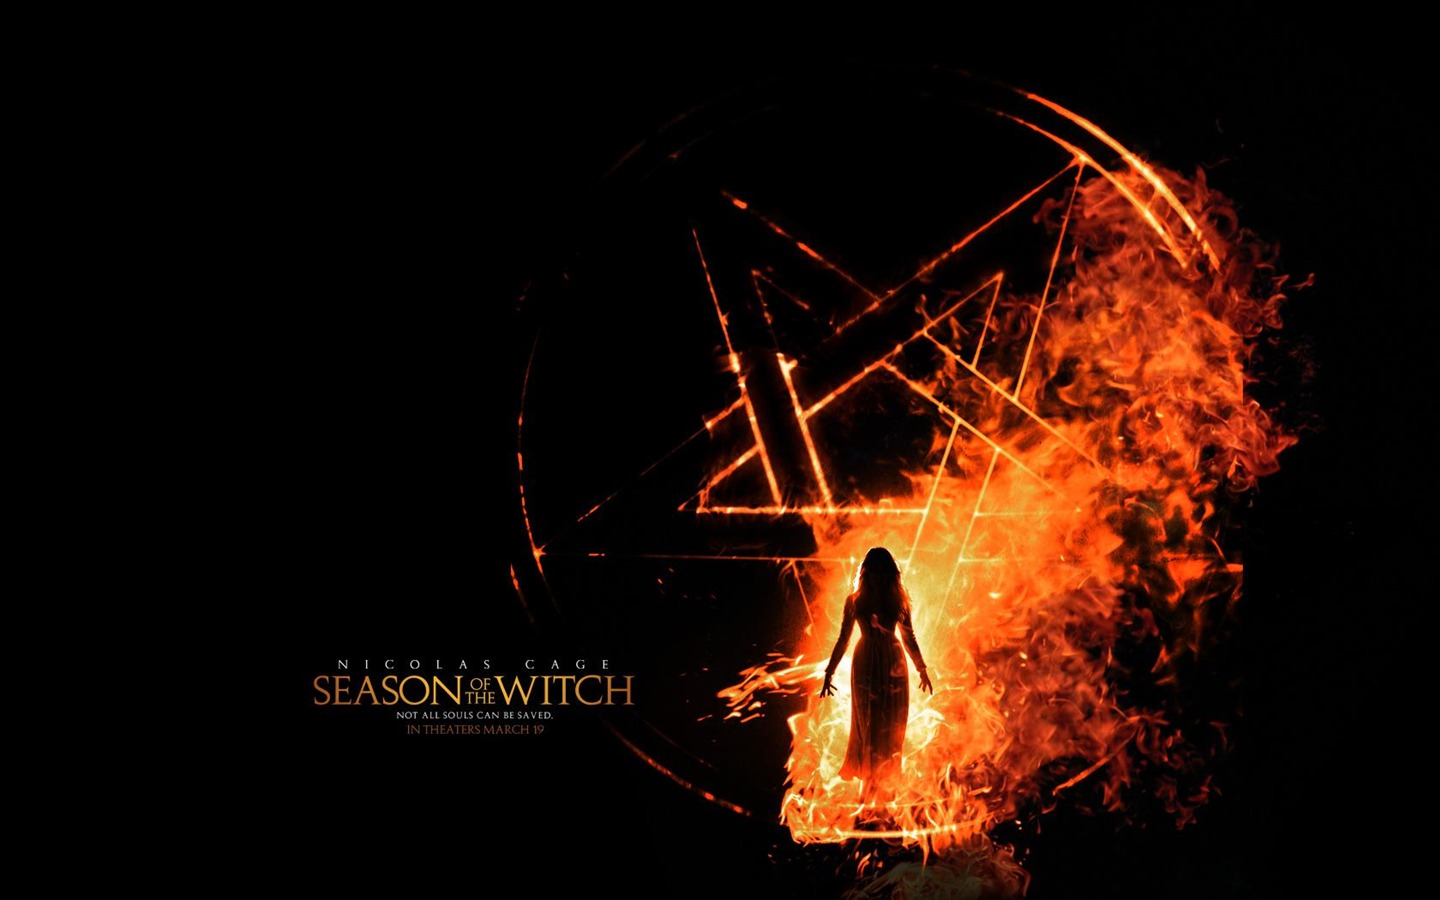 Season of the Witch 女巫季節 壁紙專輯 #37 - 1440x900